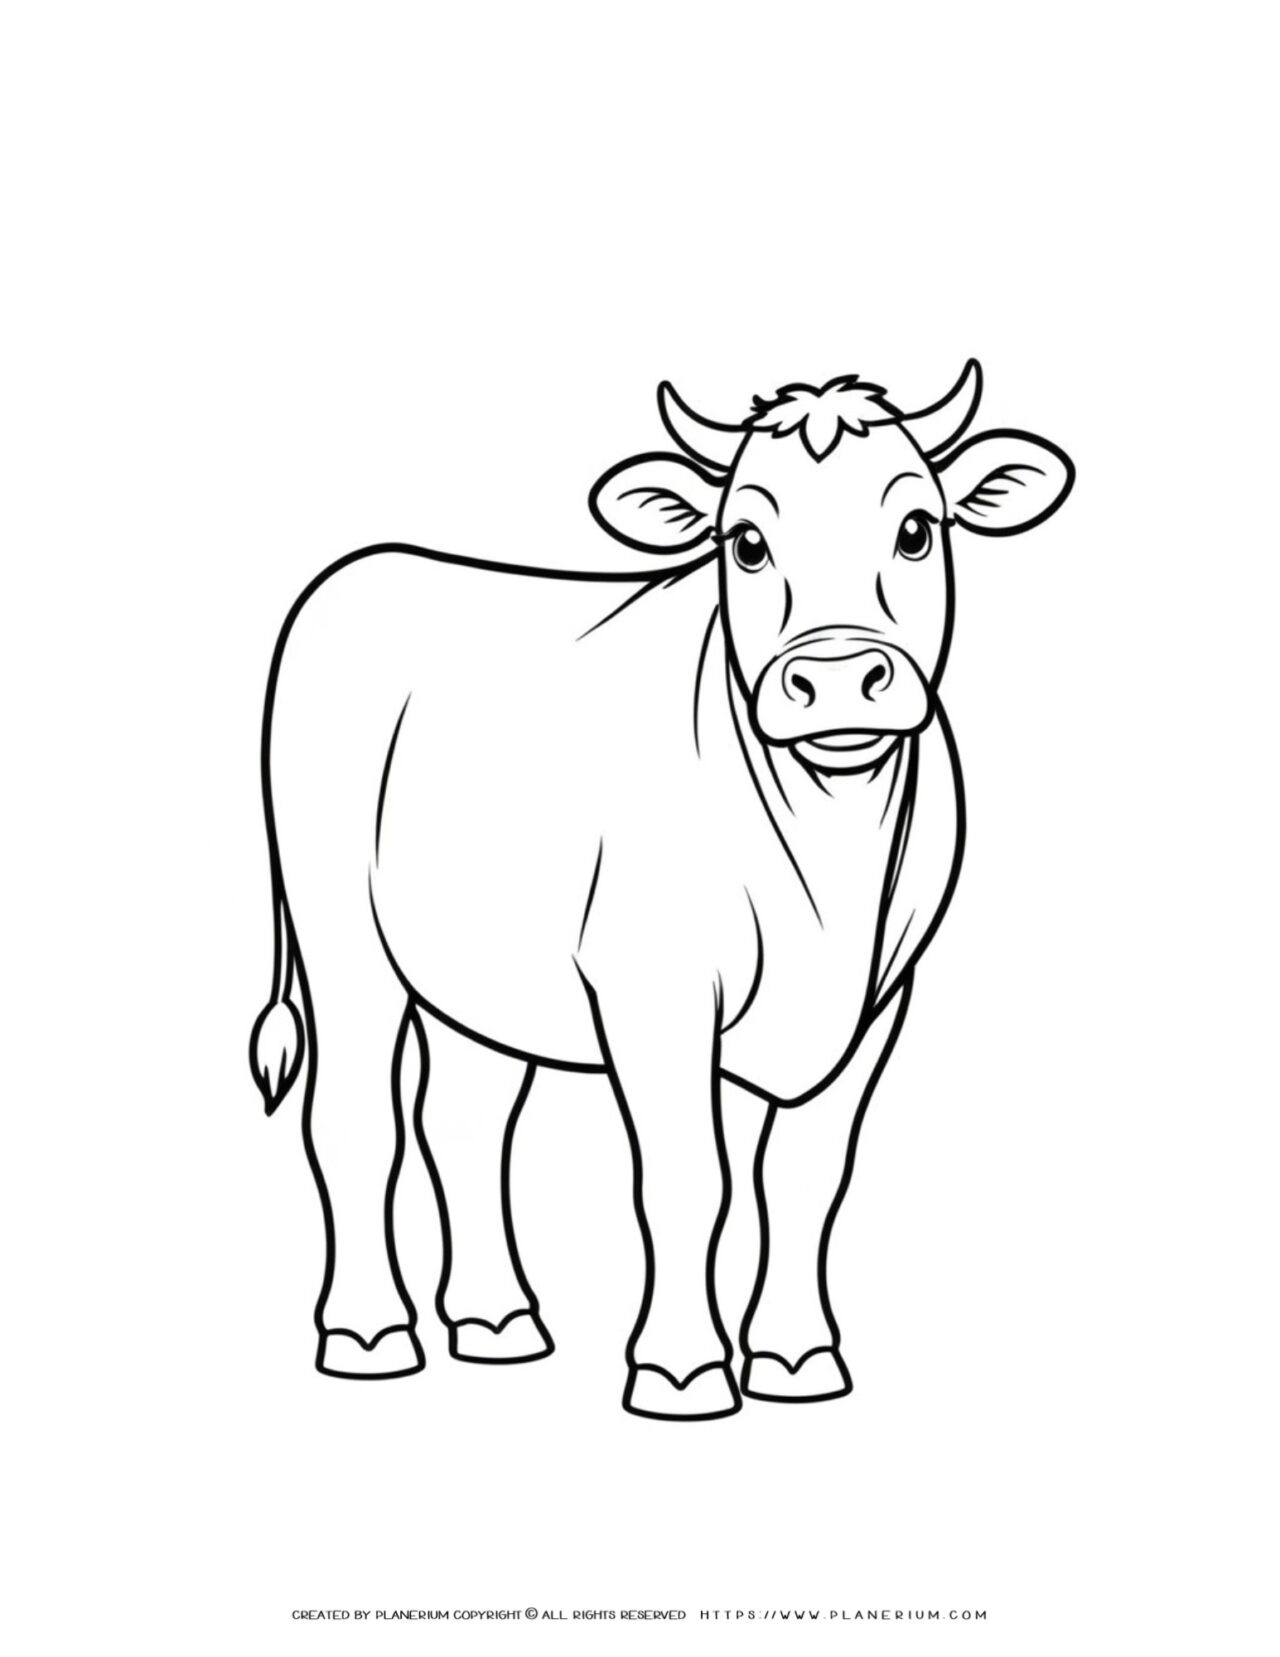 cow-outline-coloring-page-for-kids